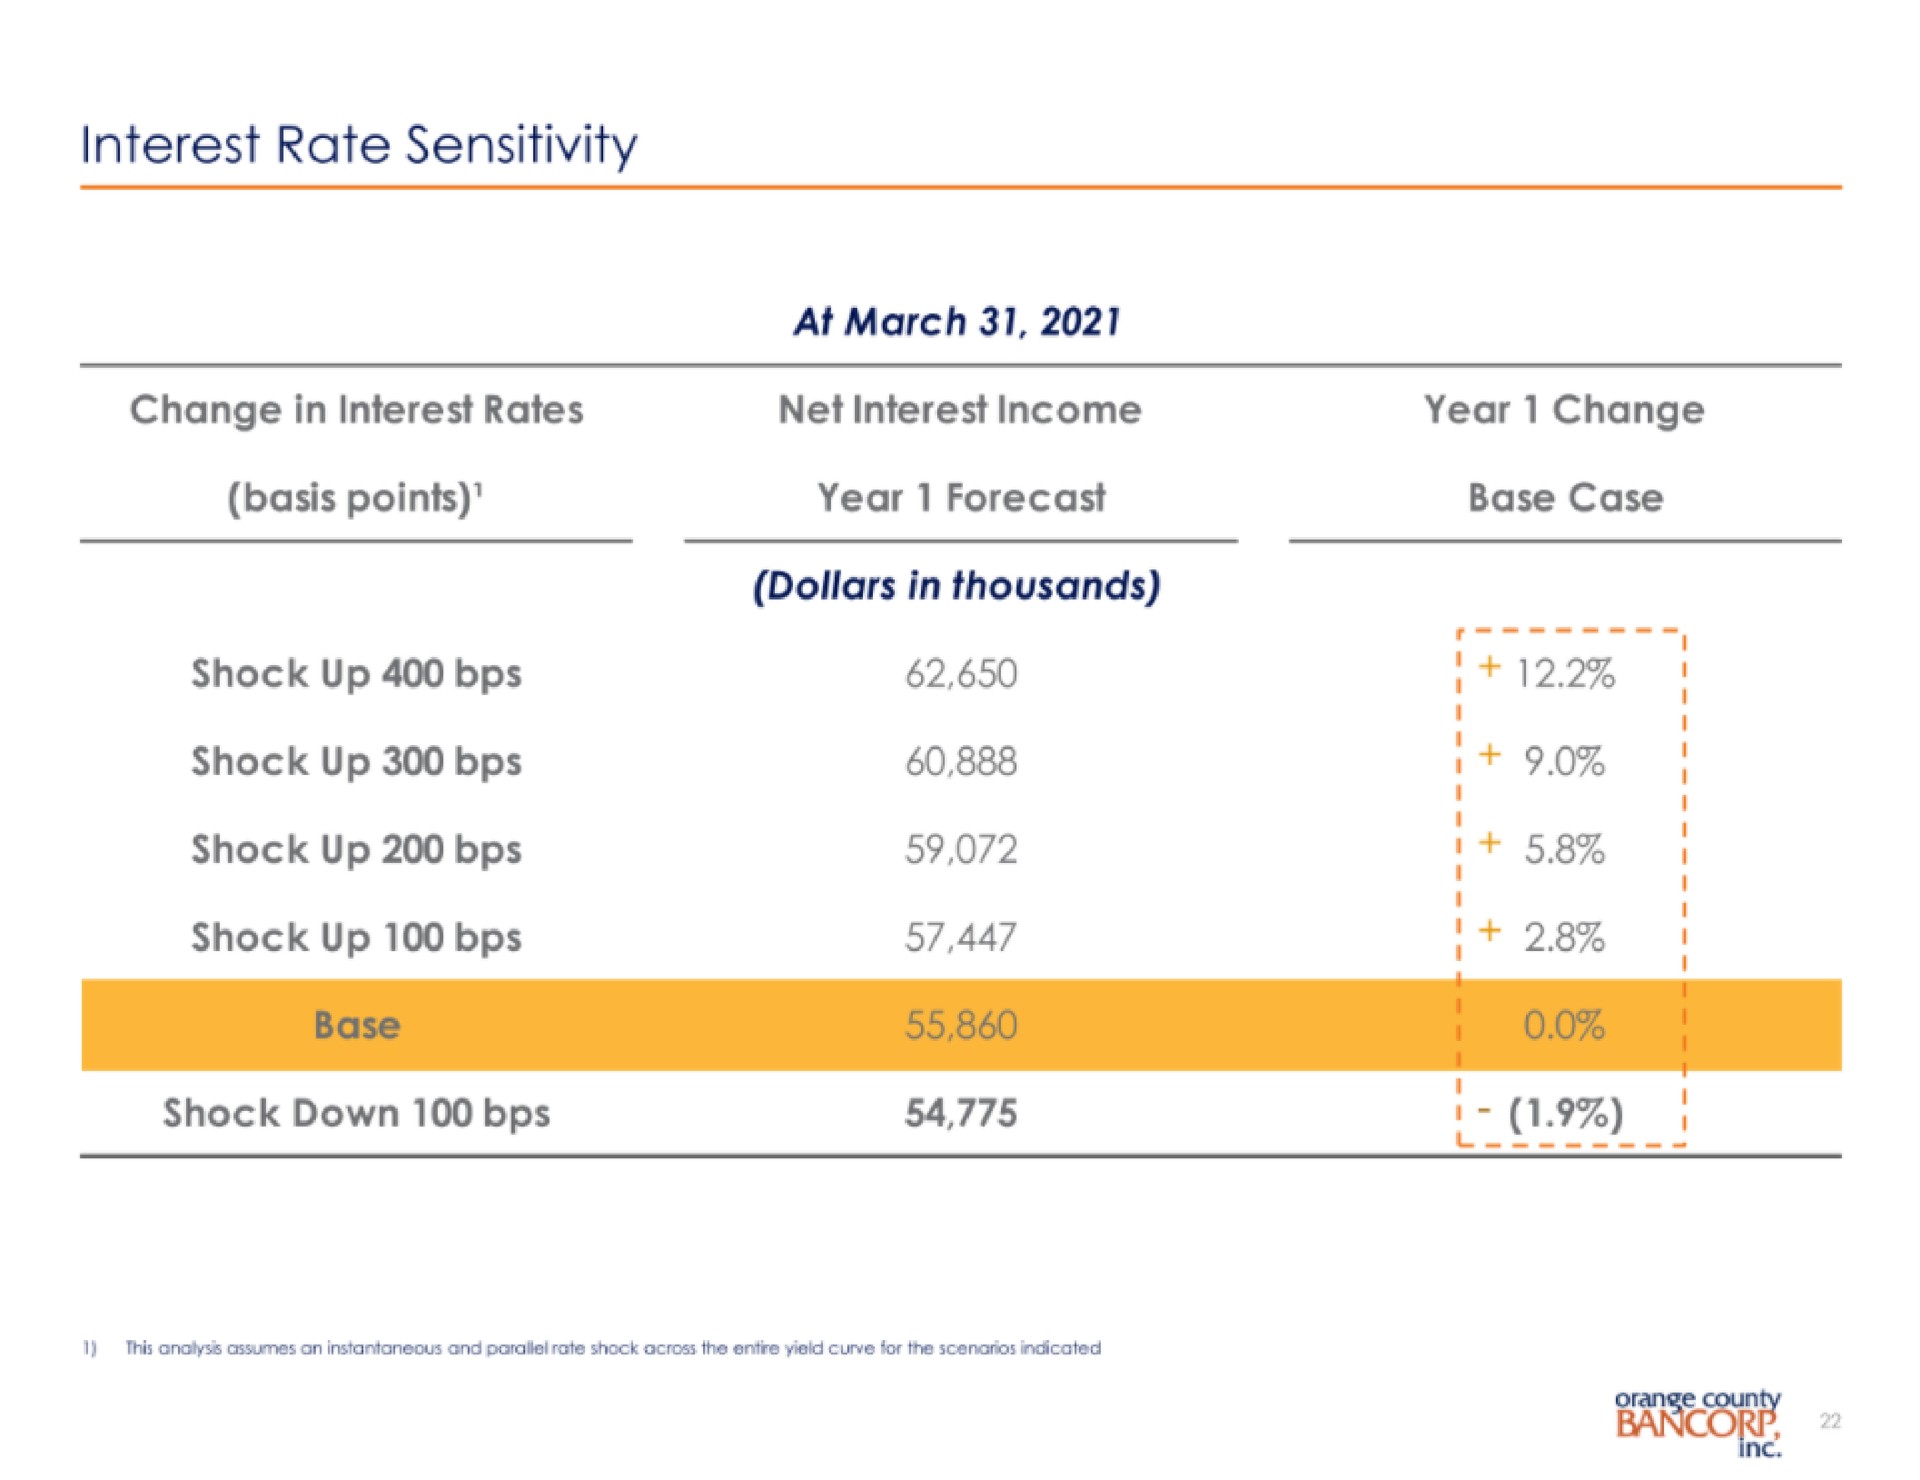 interest rate sensitivity at march shock up shock up shock up shock up dollars in thousands i i shock down | Orange County Bancorp